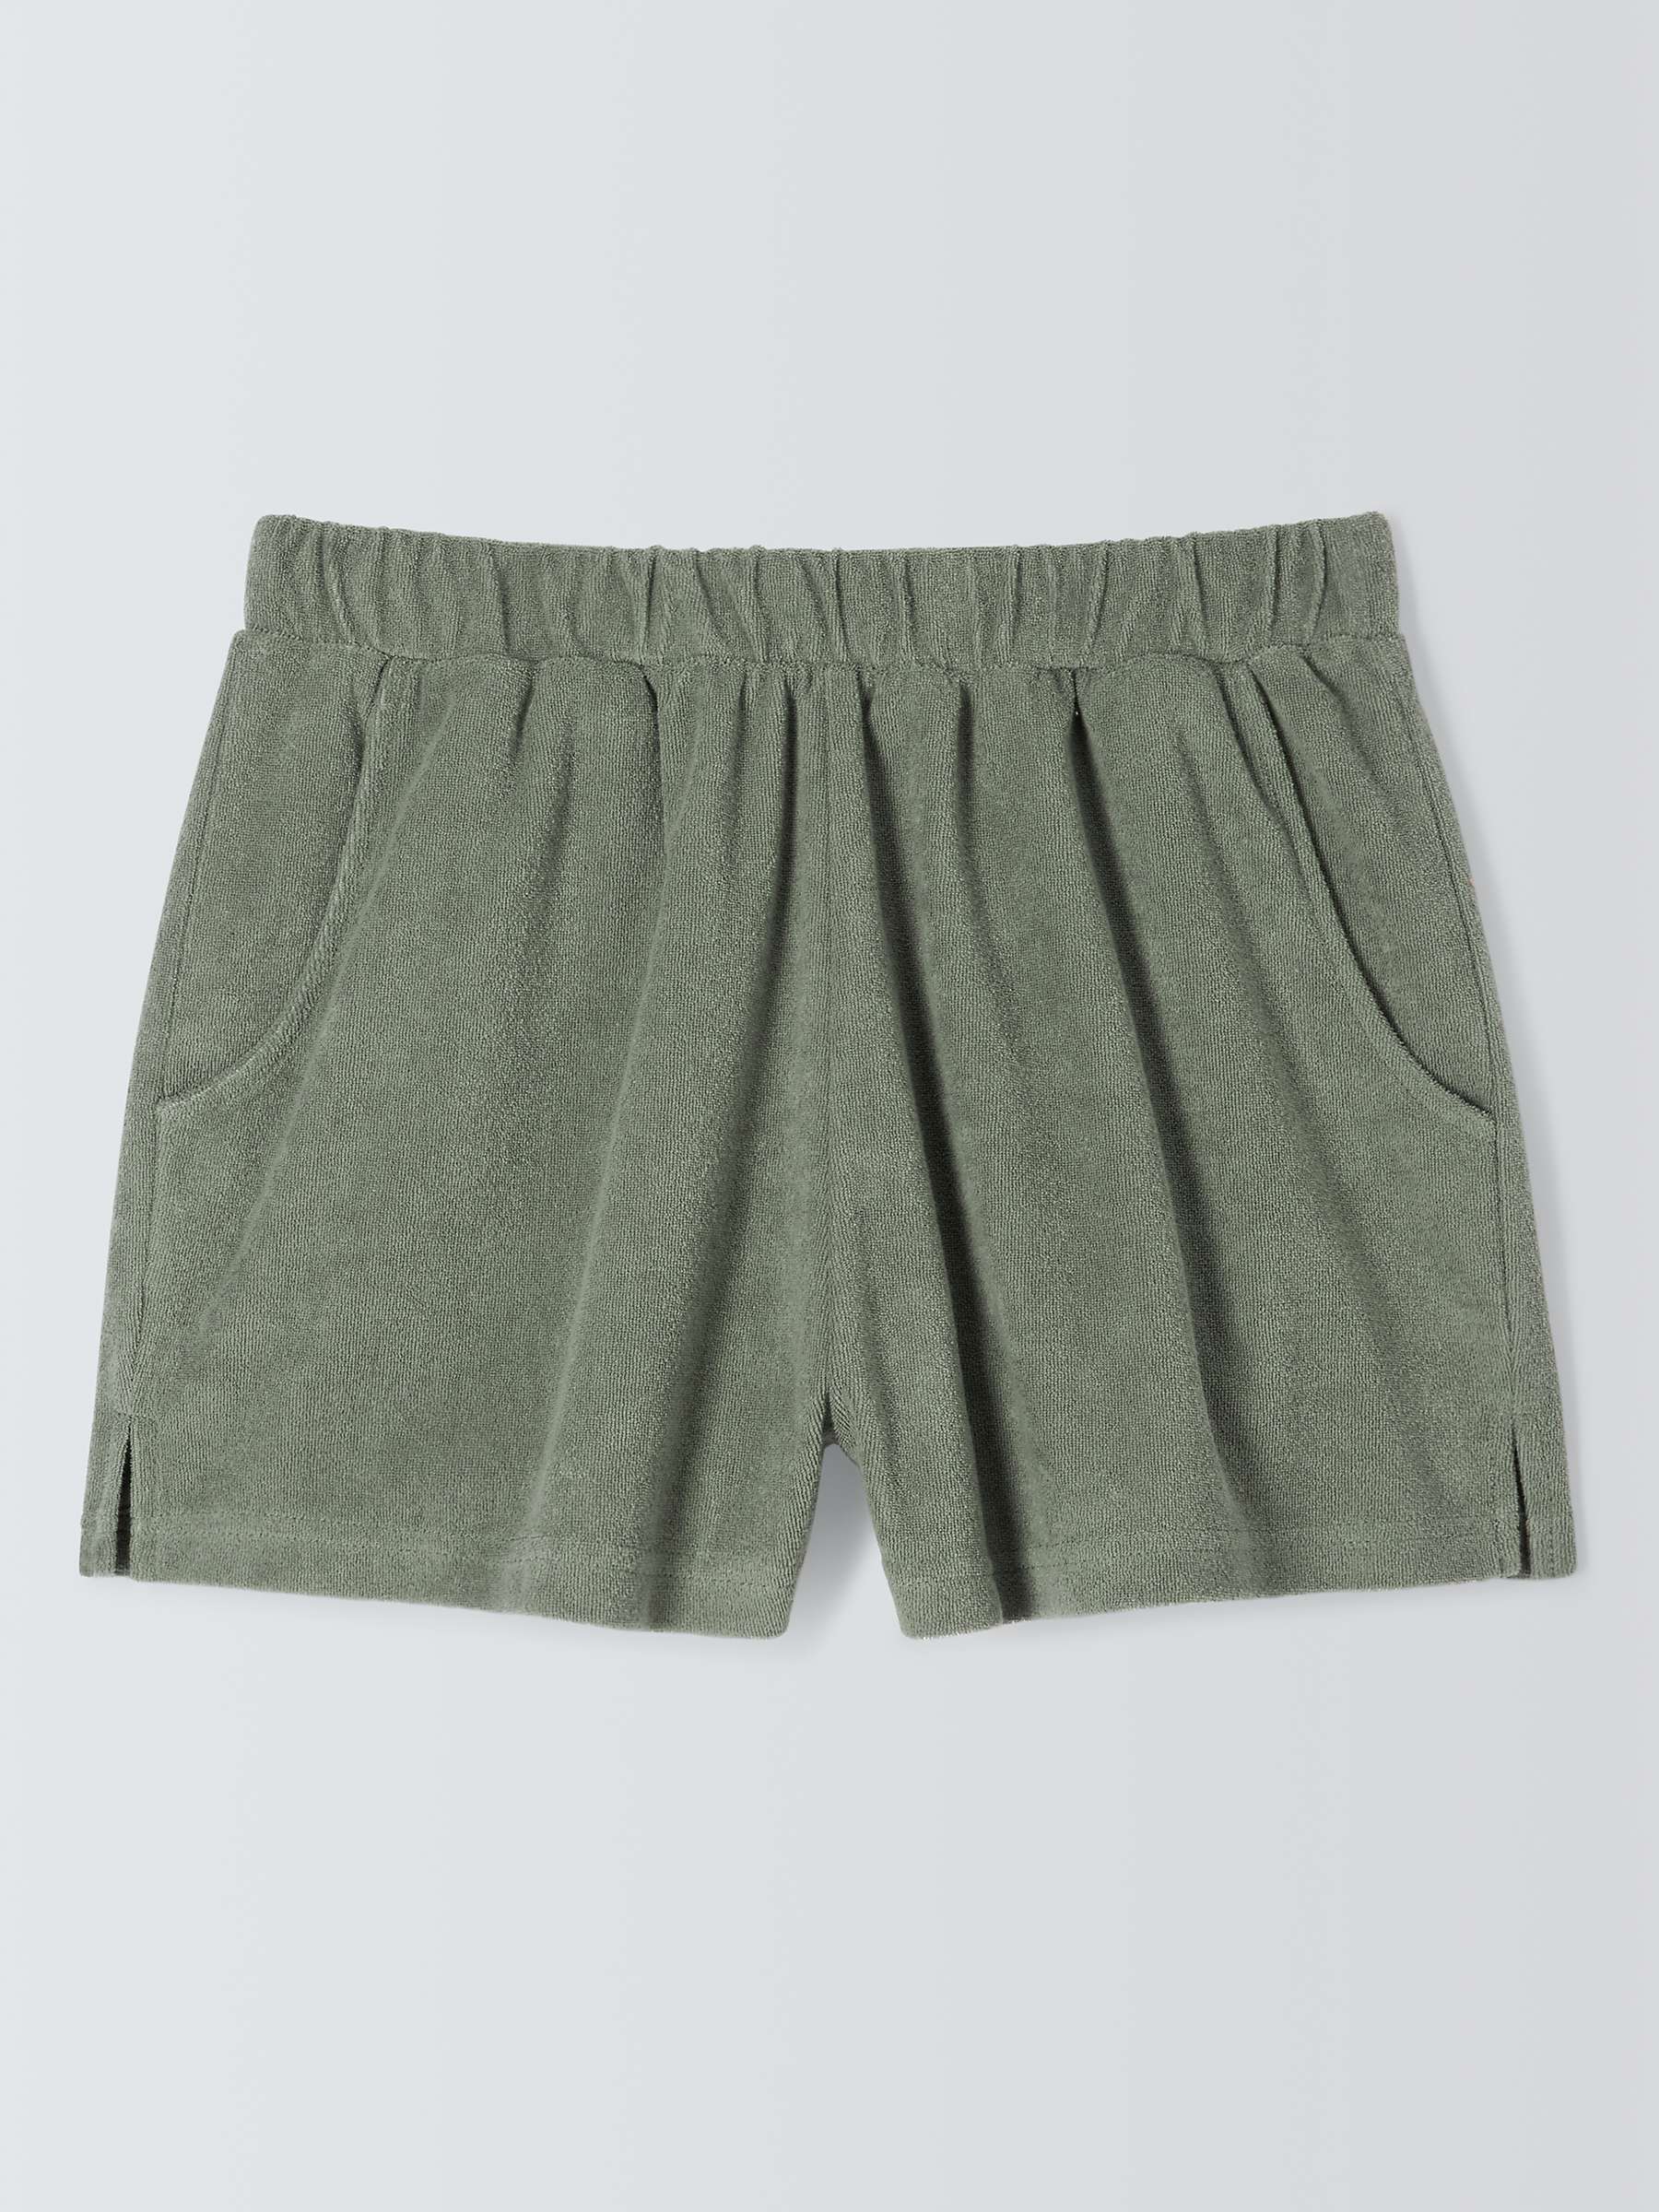 Buy John Lewis ANYDAY Towelling Beach Shorts Online at johnlewis.com